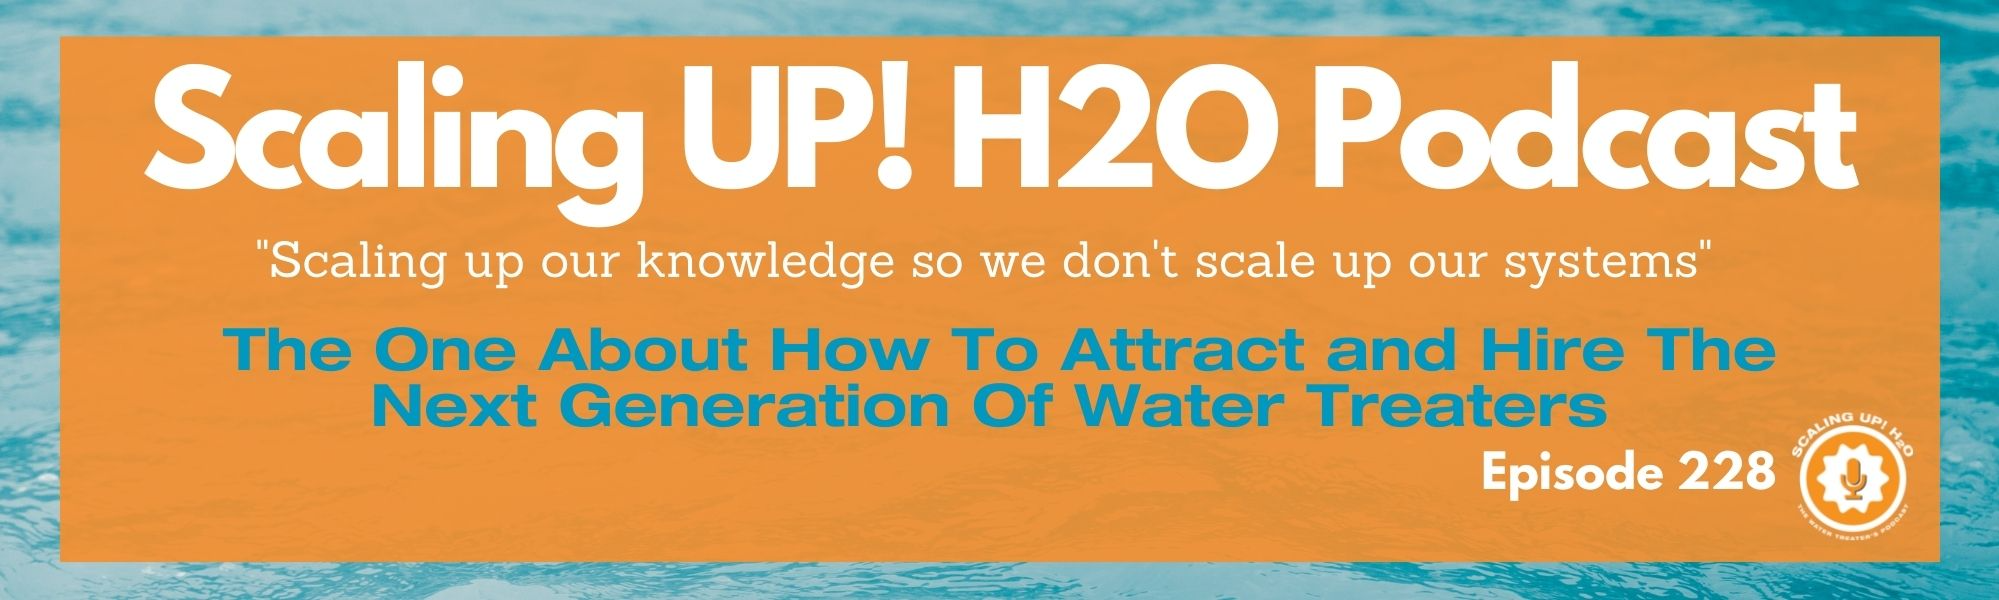 228 The One About How To Attract and Hire The Next Generation Of Water Treaters - Scaling UP! H2O